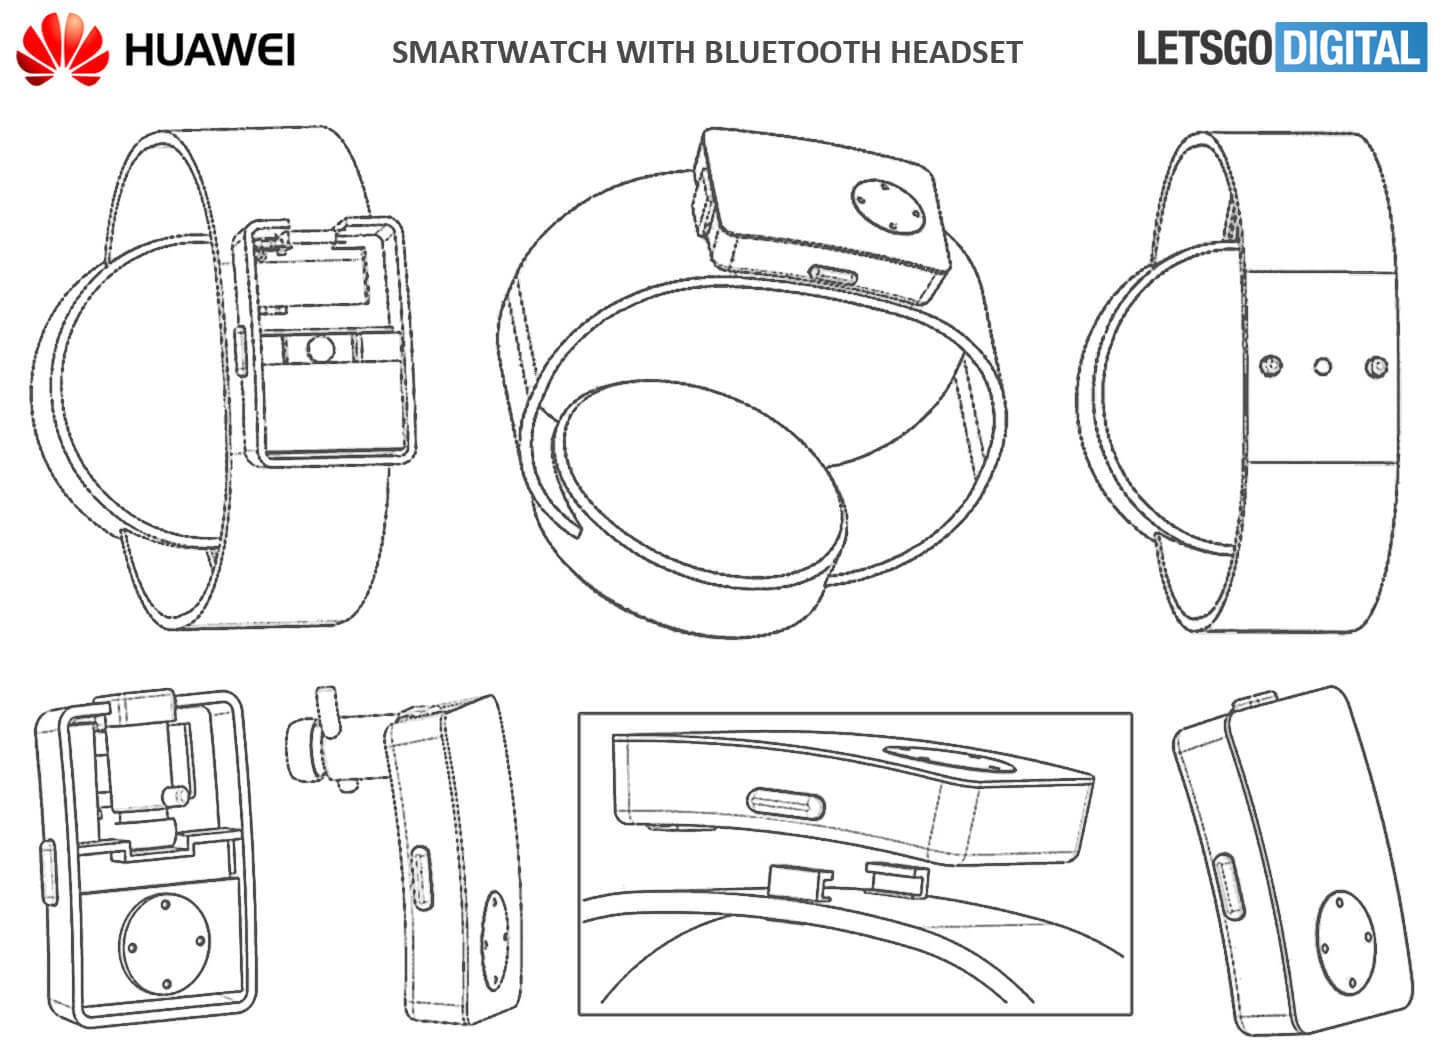 Huawei's next smartwatch could be only slightly innovative